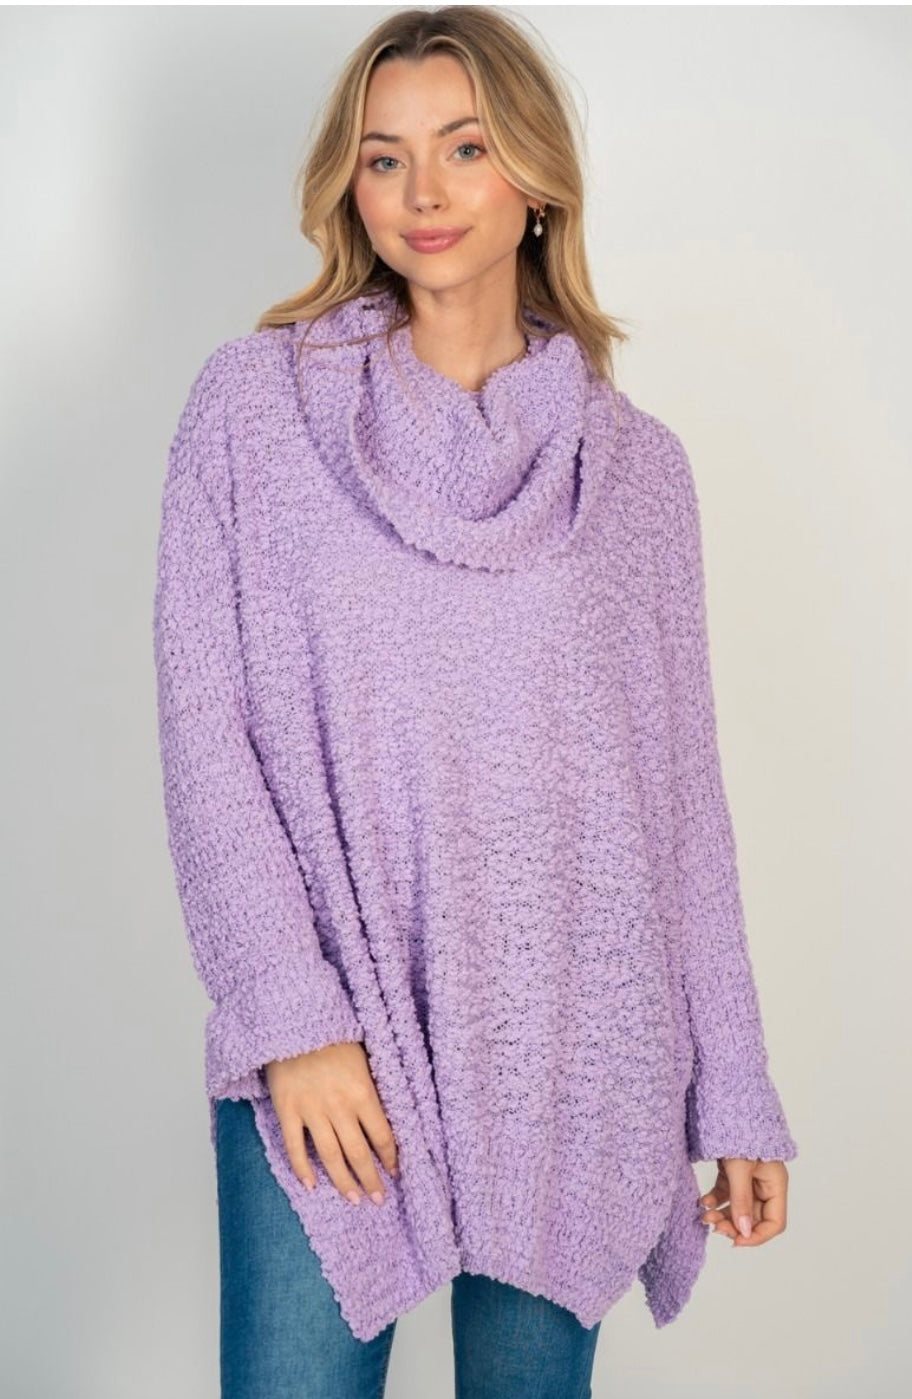 Popcorn Cowl Neck with Side Slits (2 Colors)